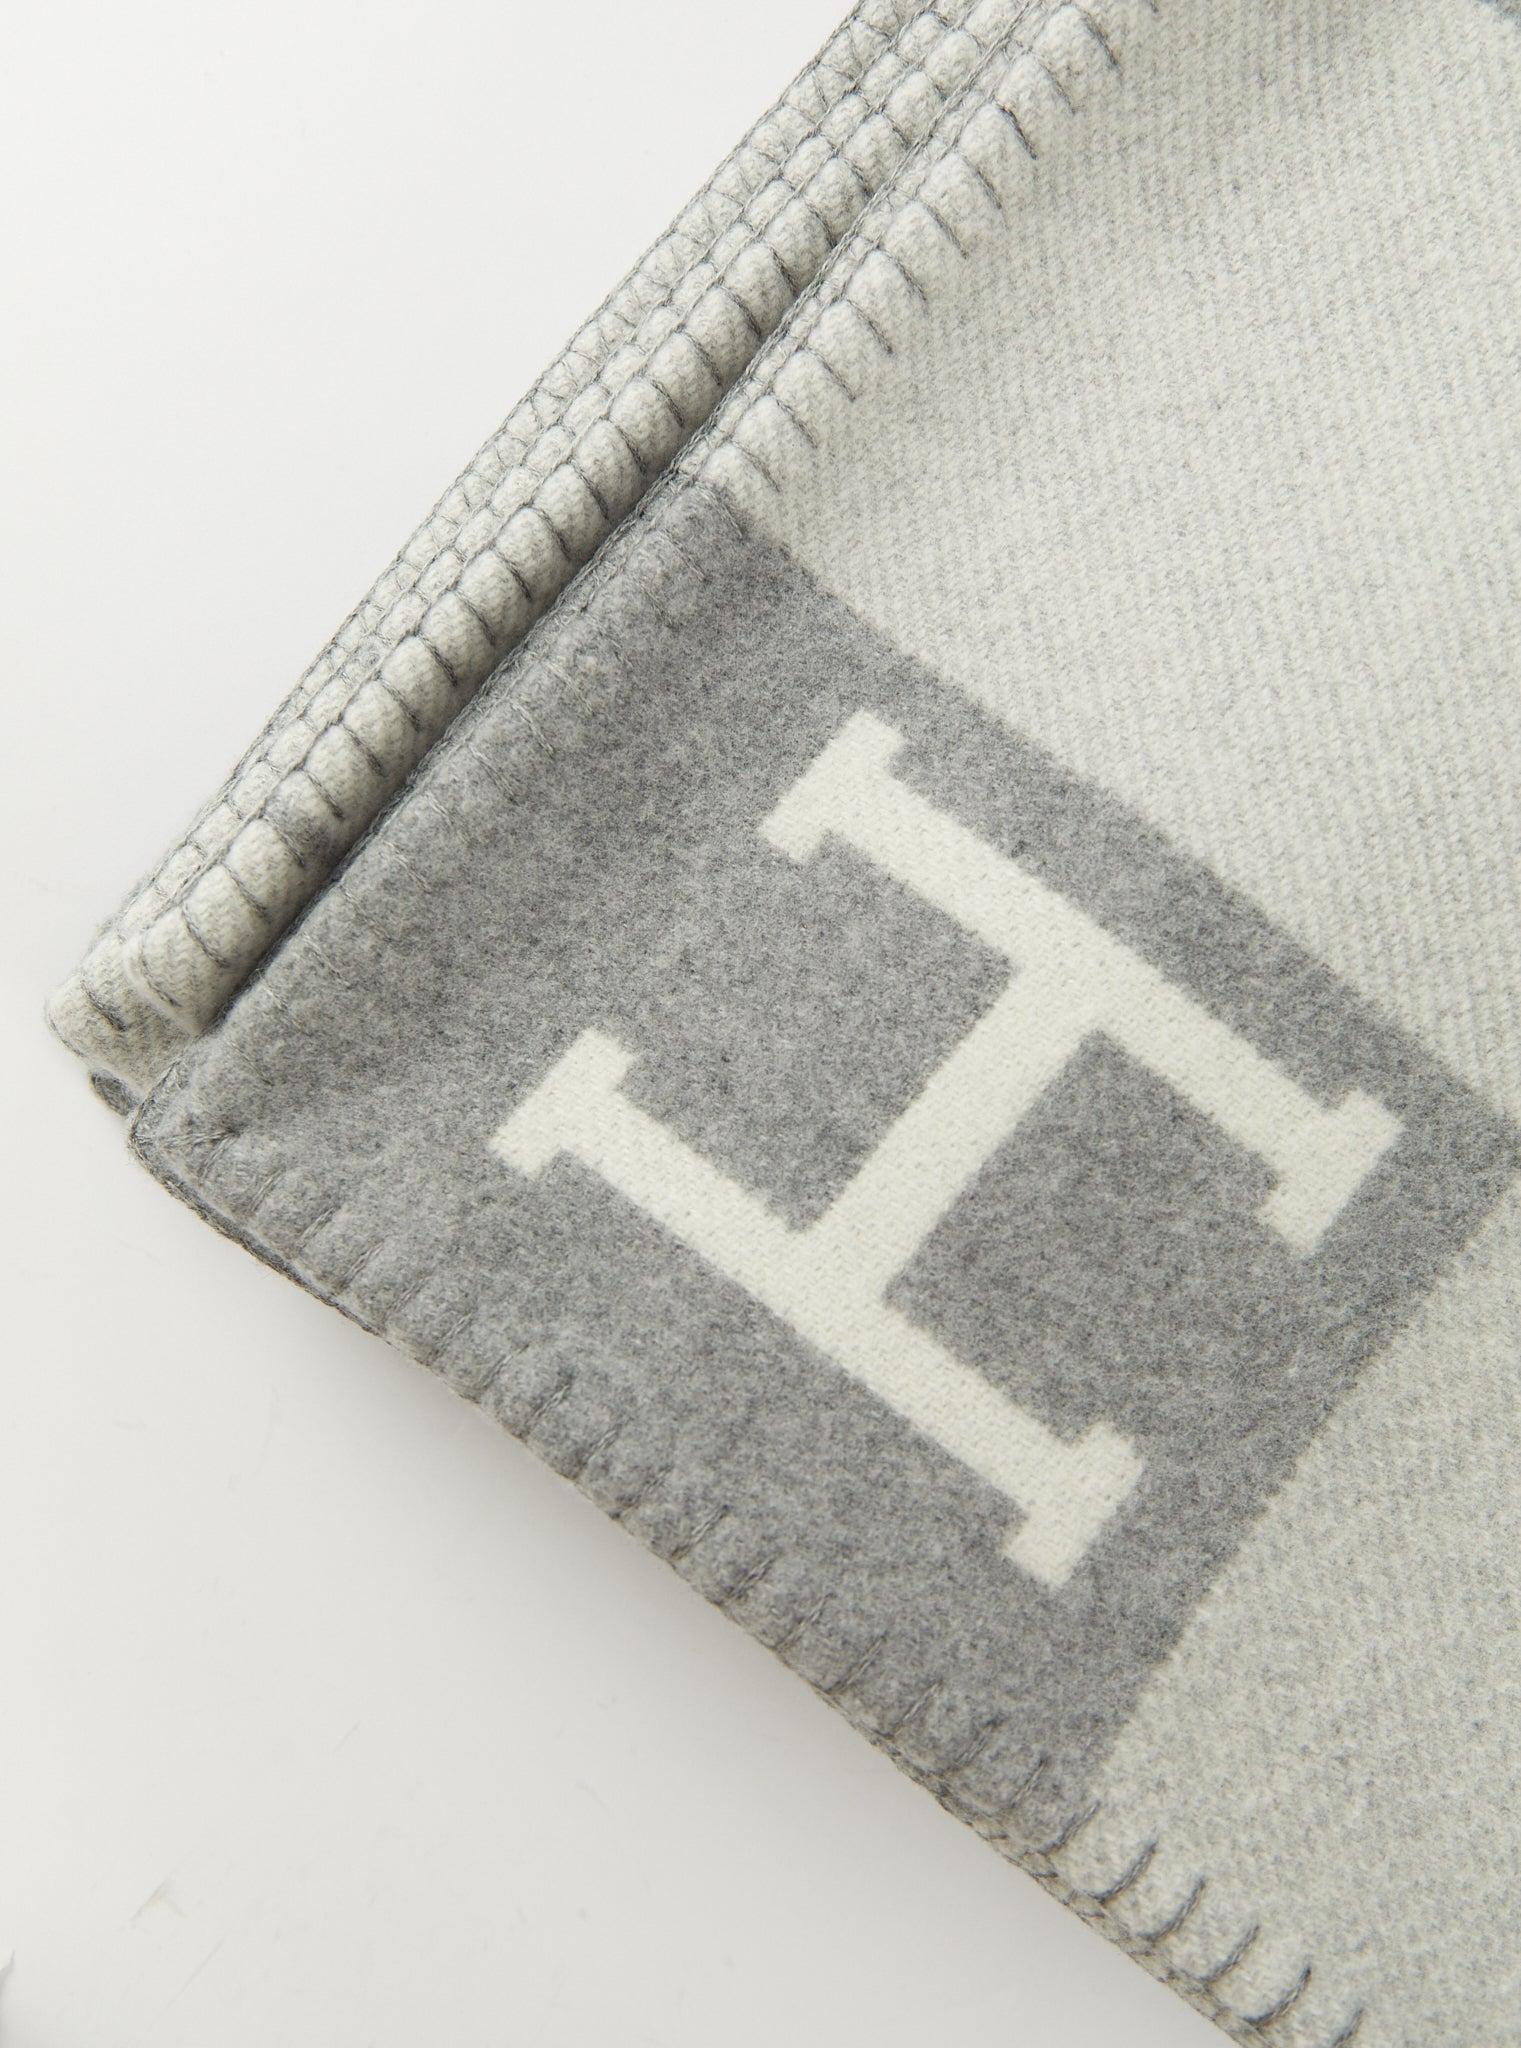 Hermès Avalon throw blanket in Merinos wool and cashmere (90% Merino wool, 10% Cashmere)

Ecru and Gris Clair

Made in Great Britain

Dimensions: L 135 x H 170 cm

